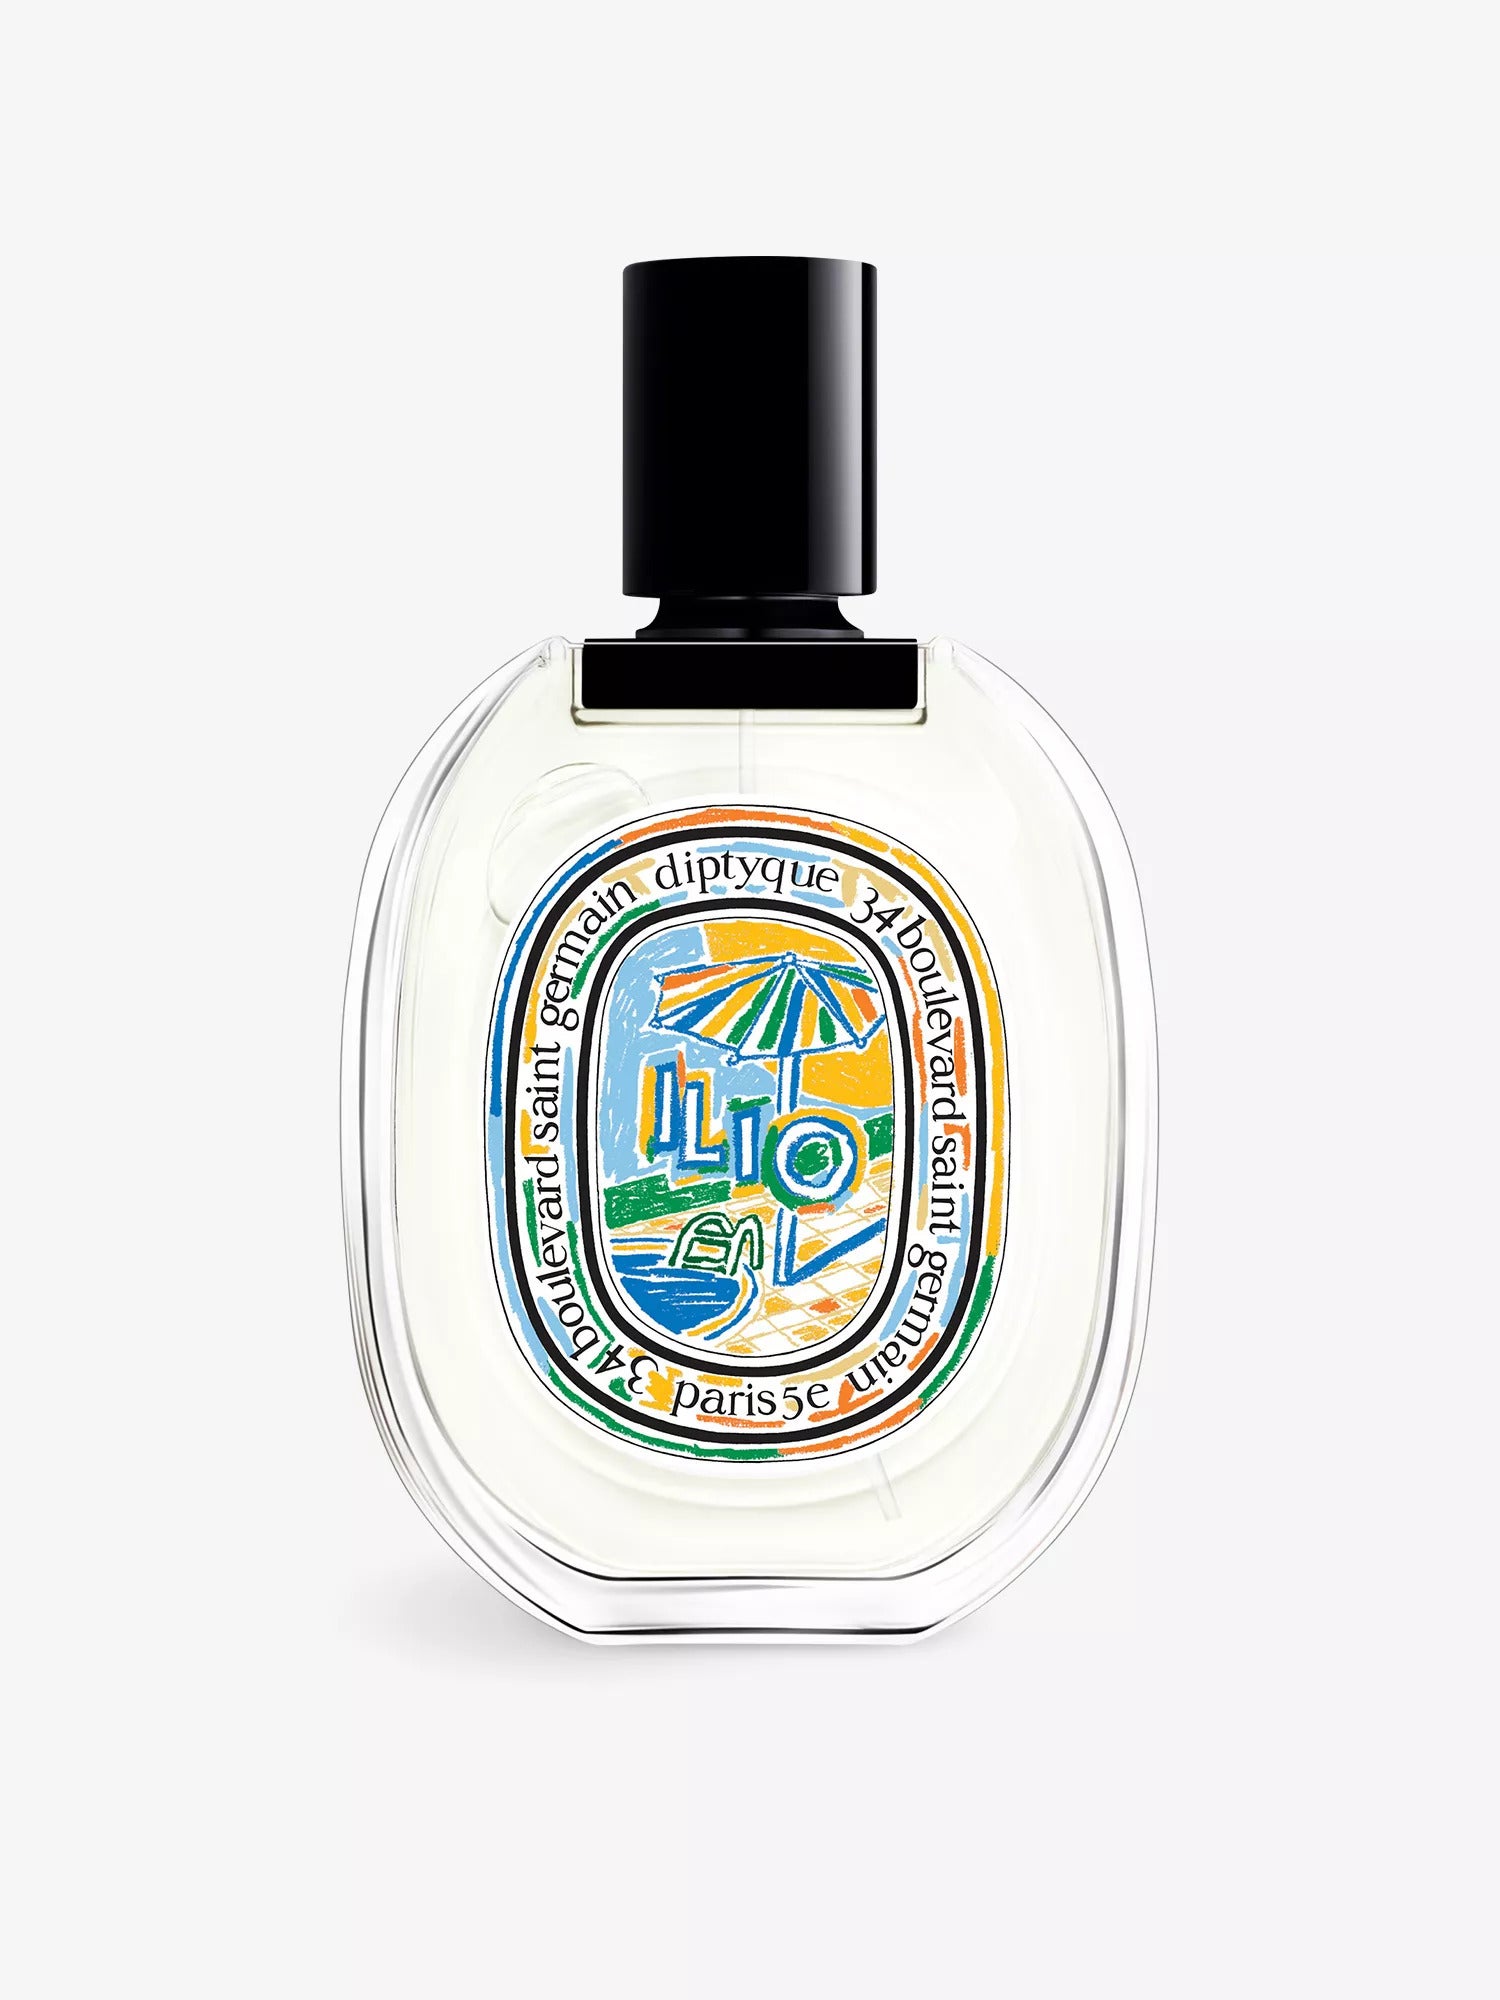 8 “Summer In A Bottle” Perfumes Guaranteed To Lift Your Mood, From £10